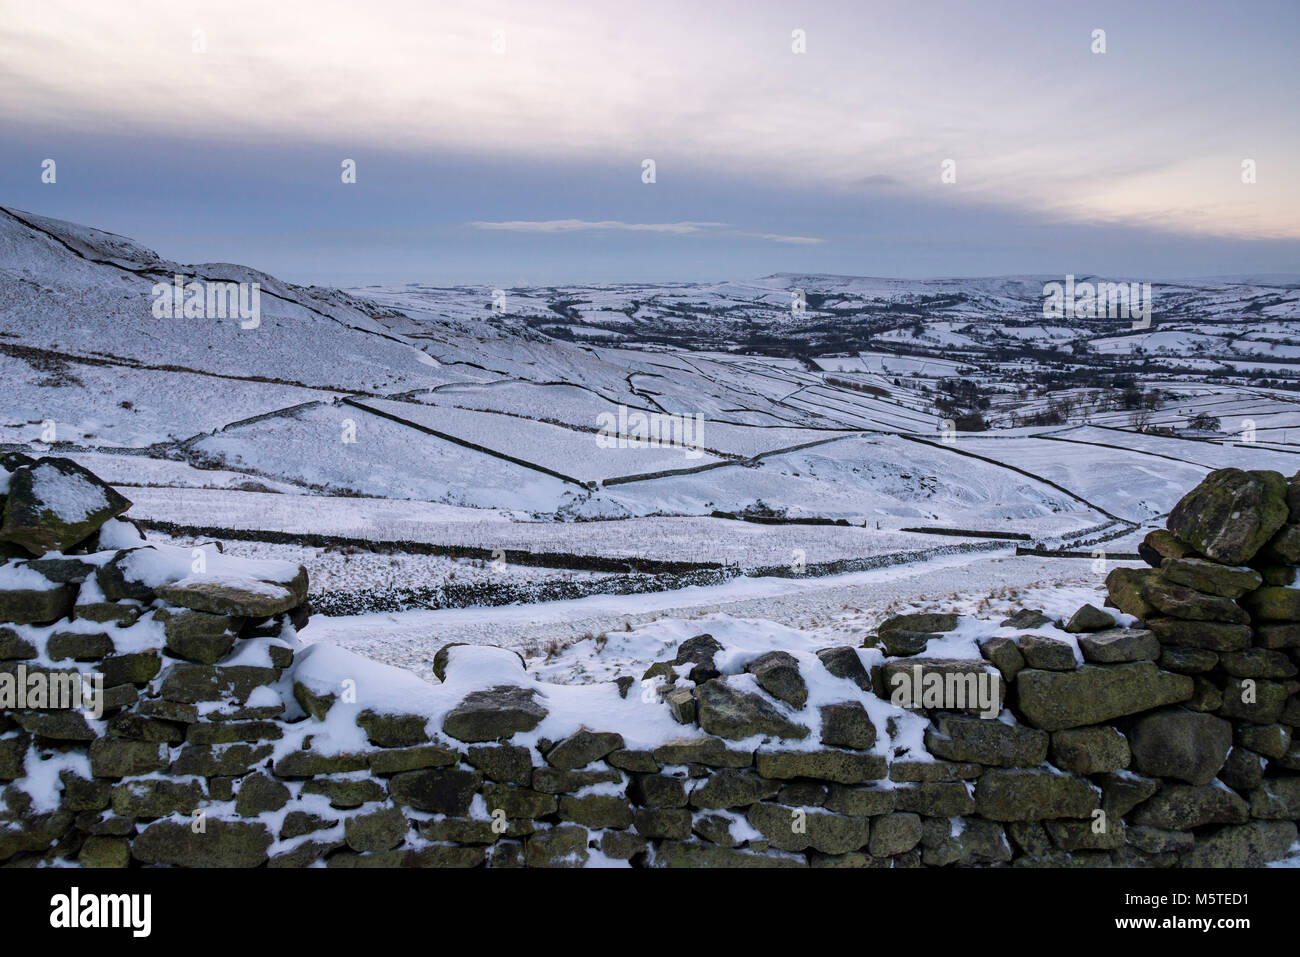 Snowy winter morning in the hills of the Peak District. View from South Head towards Chapel-en-le-frith, Derbyshire, England. Stock Photo